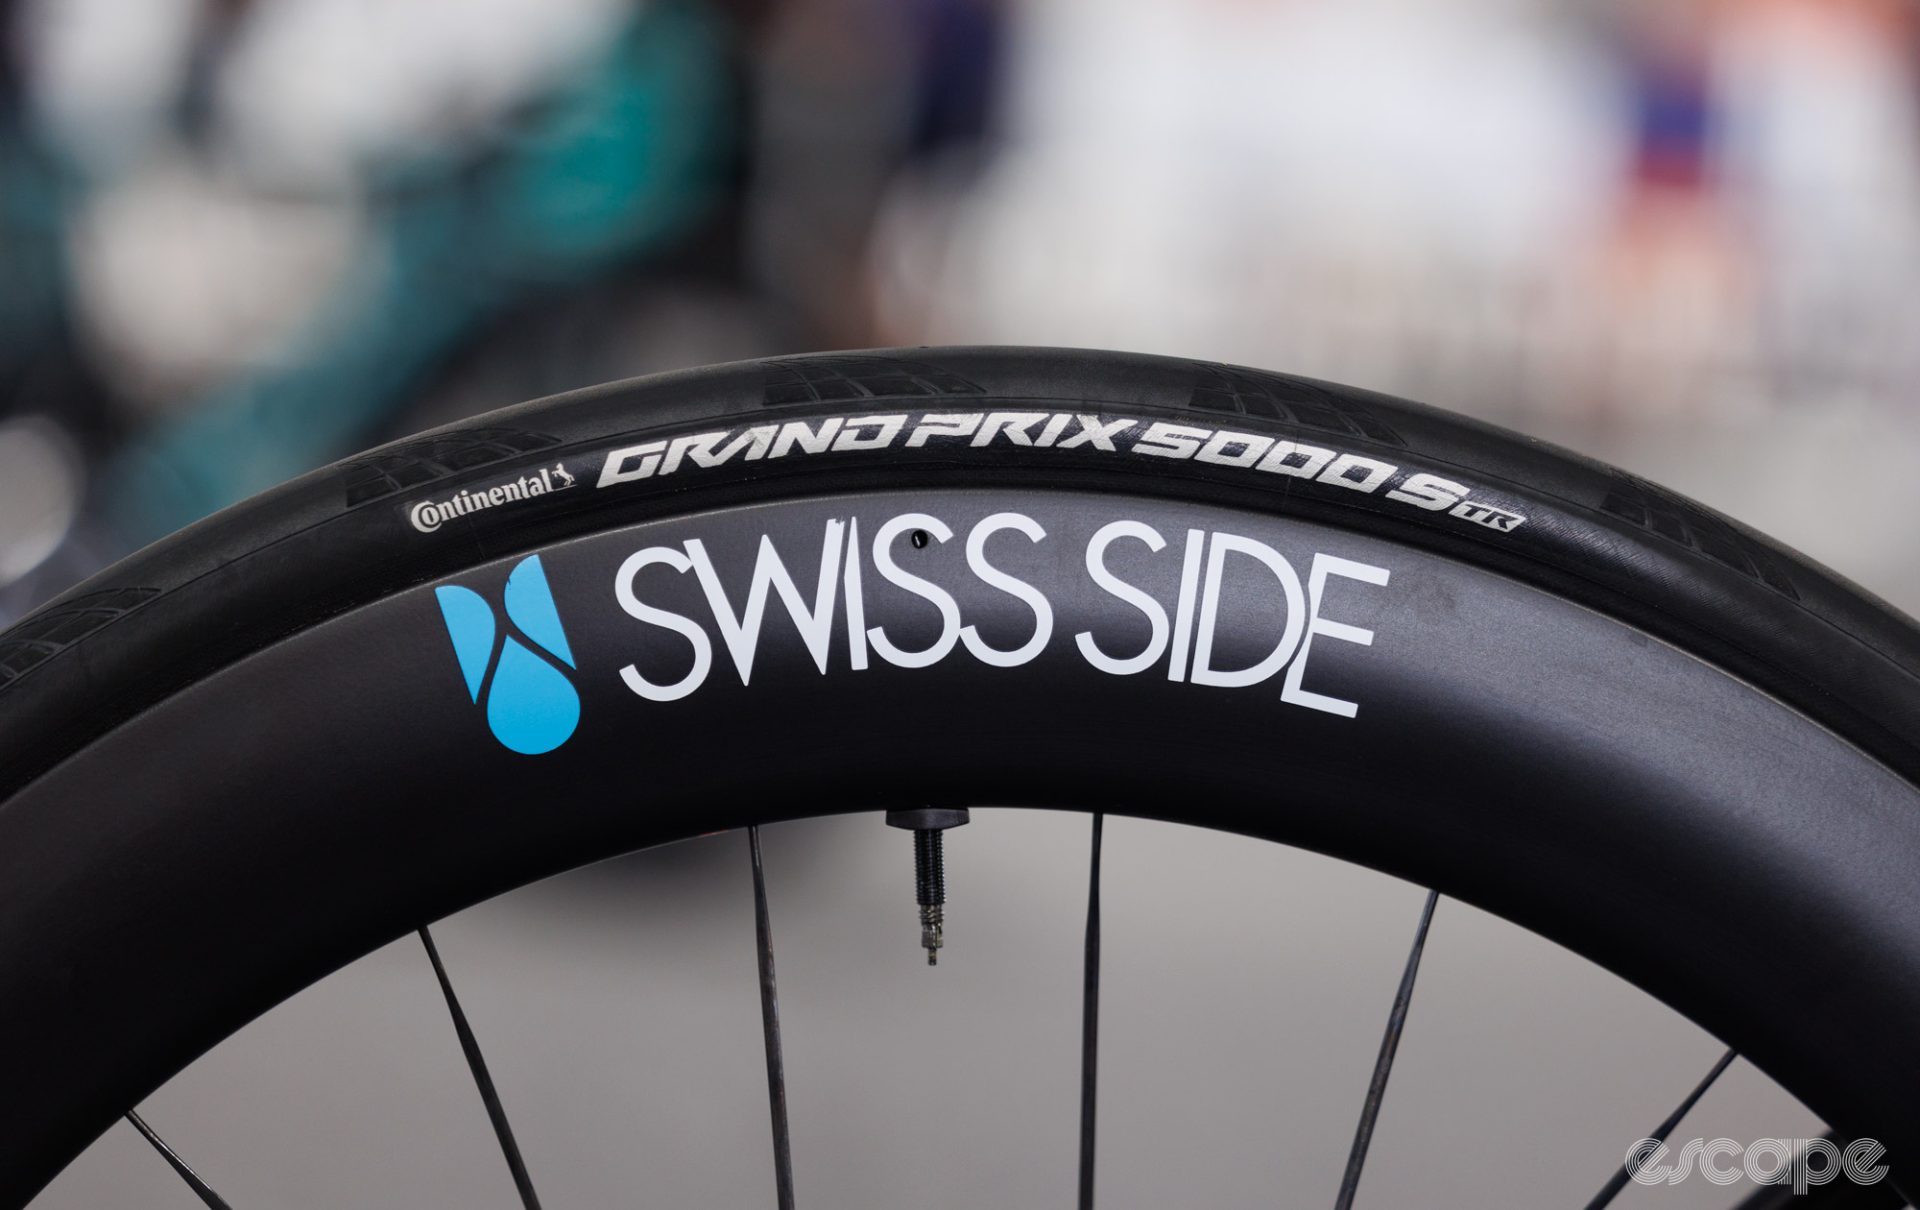 SwissSide wheels with hidden spoke nipples and Continental GP 5000 S TR tyres.